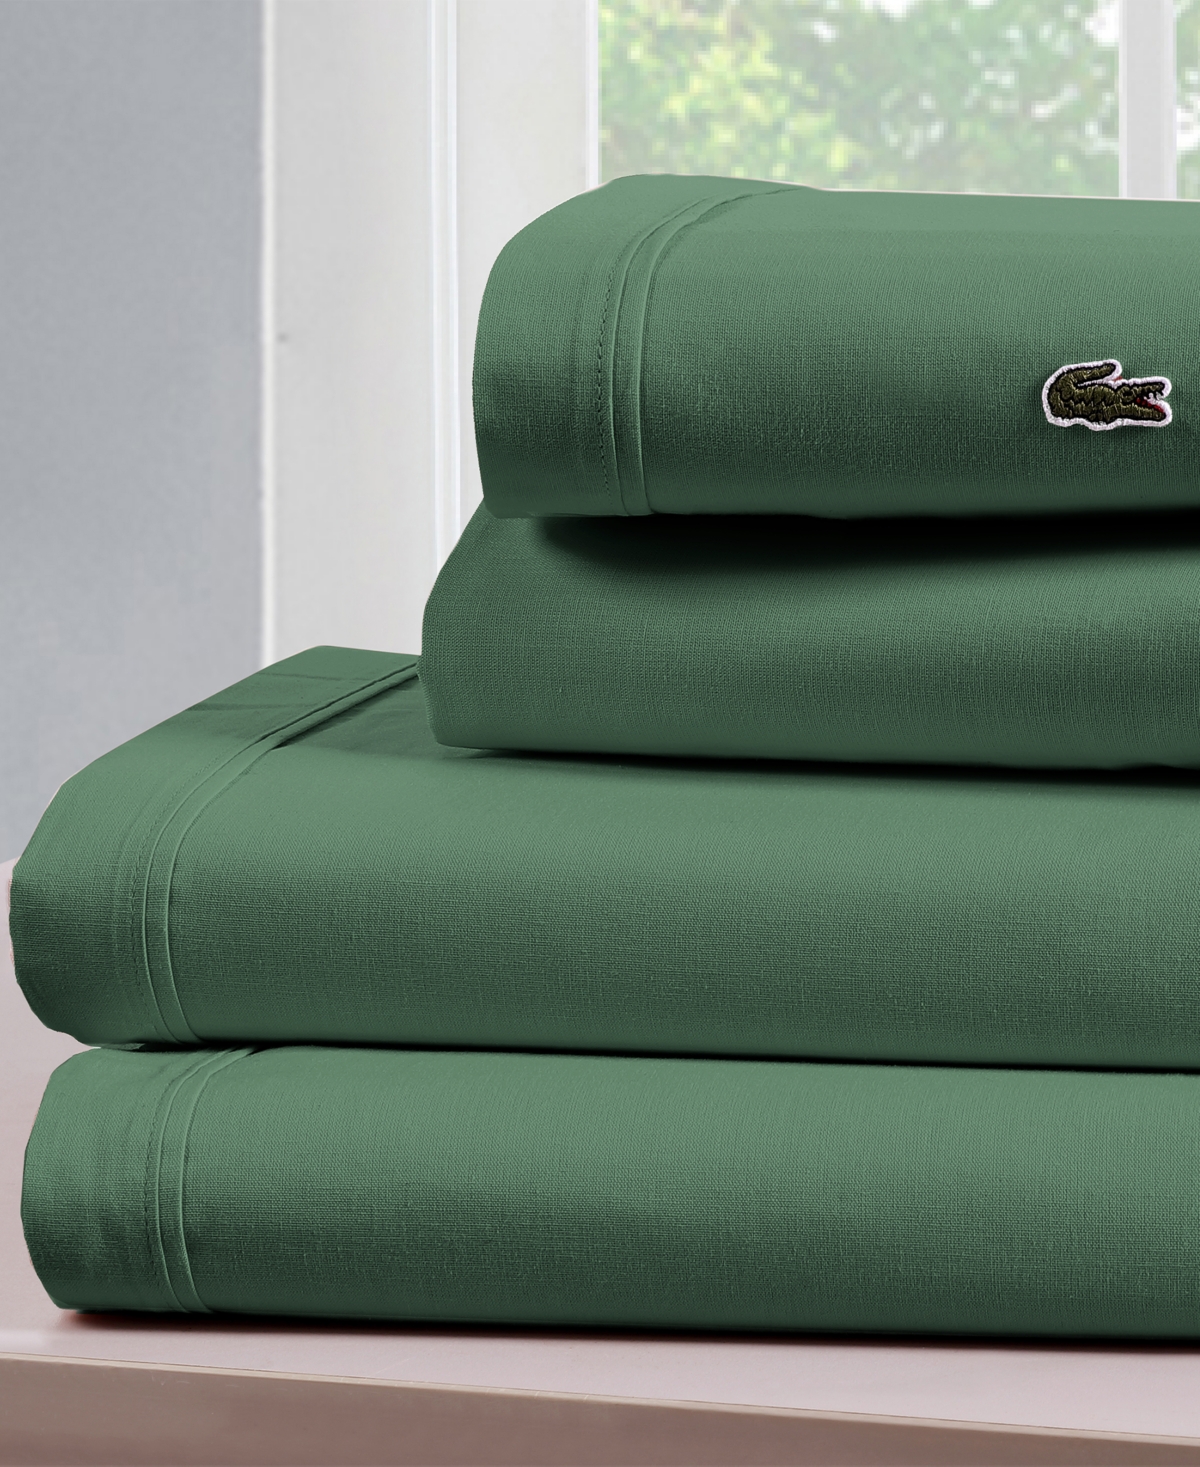 Lacoste Home Solid Cotton Percale Pillowcase Pair, Standard In Ivy Green